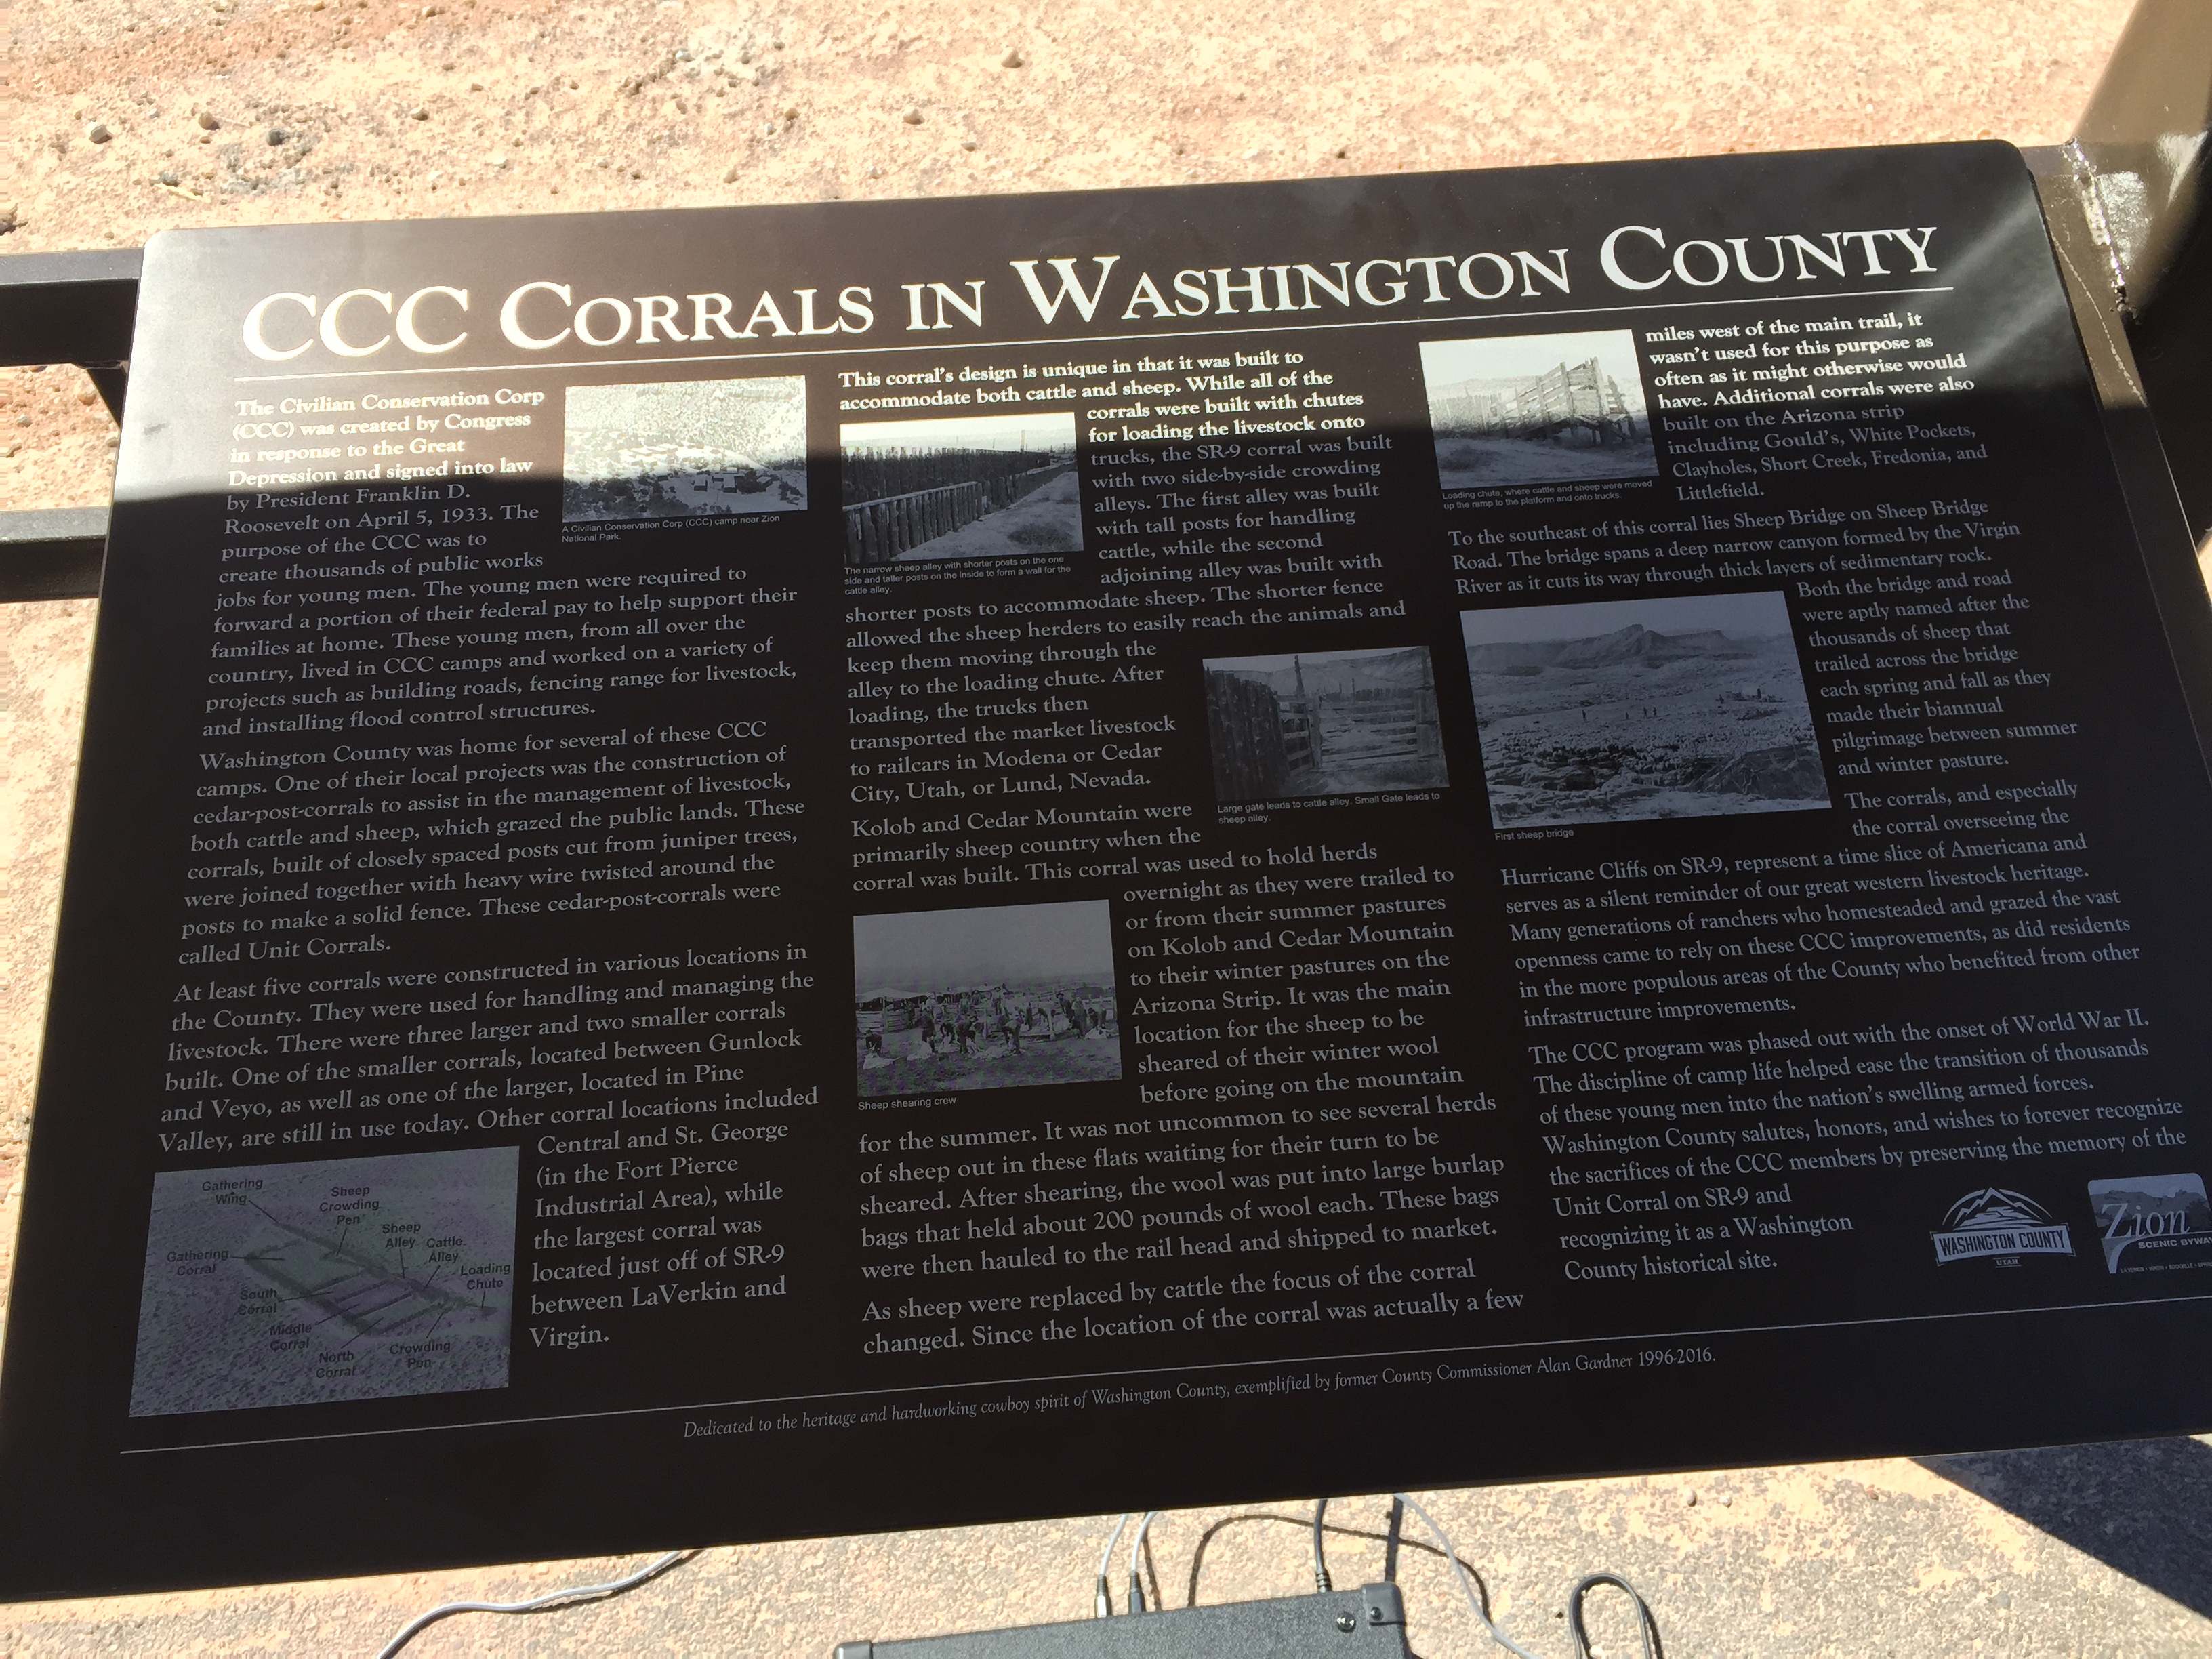 CCC Corrals in Washington County plaque at the new informational kiosk at the Virgin CCC Corral